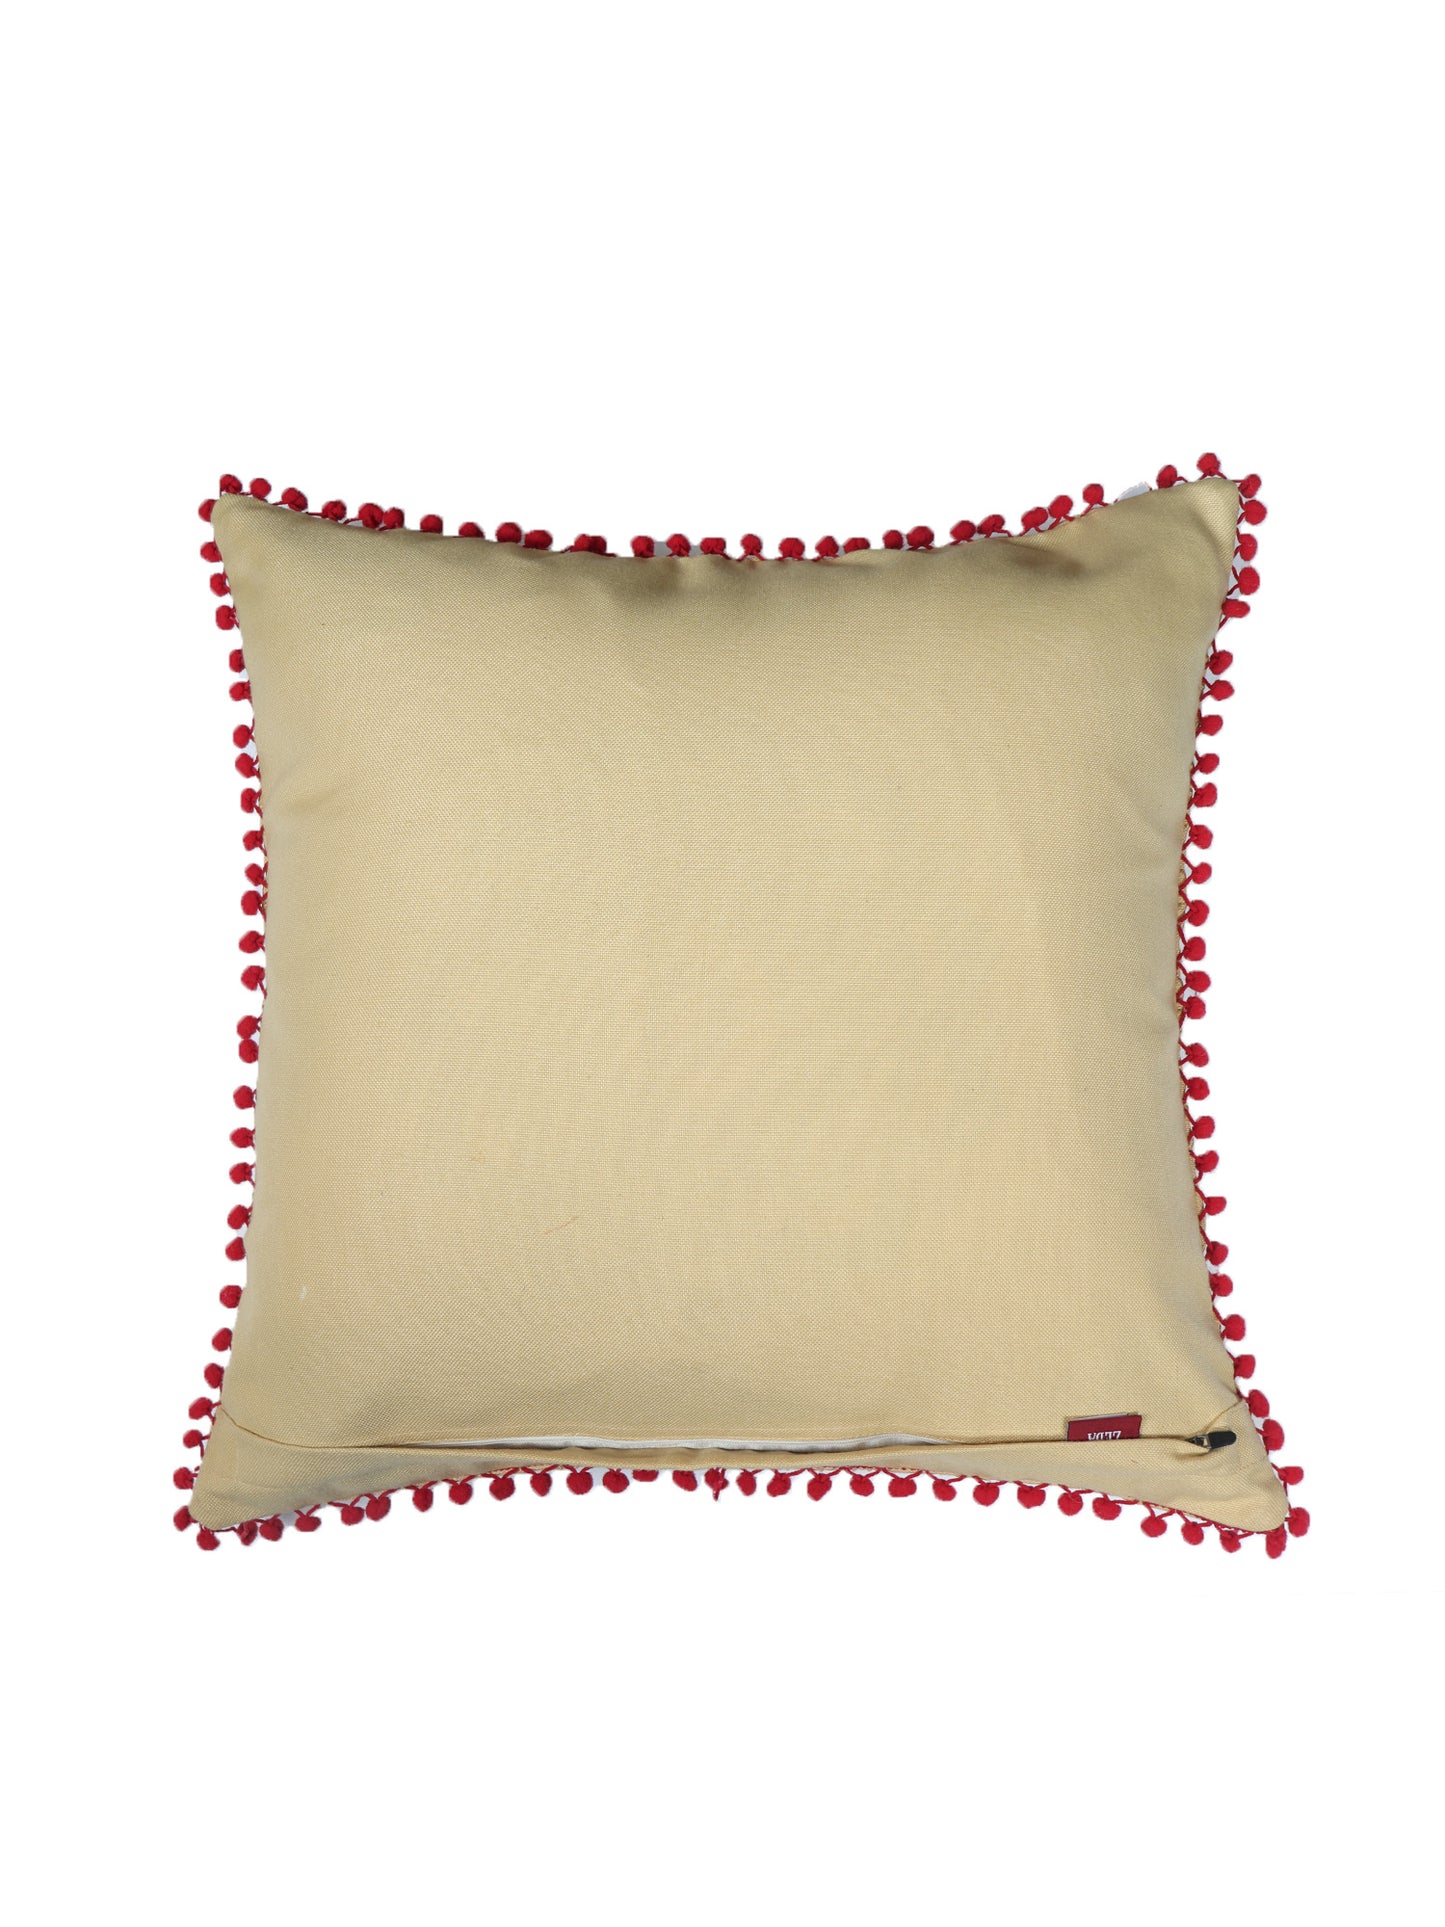 Hand Embroidered Cushion Cover - Luxe Collection | Sofa, Bedroom, Couch | Polycanvas Embroidery with Pompoms - Cream - 18x18 inch (45x45 cms) (Pack of 1)